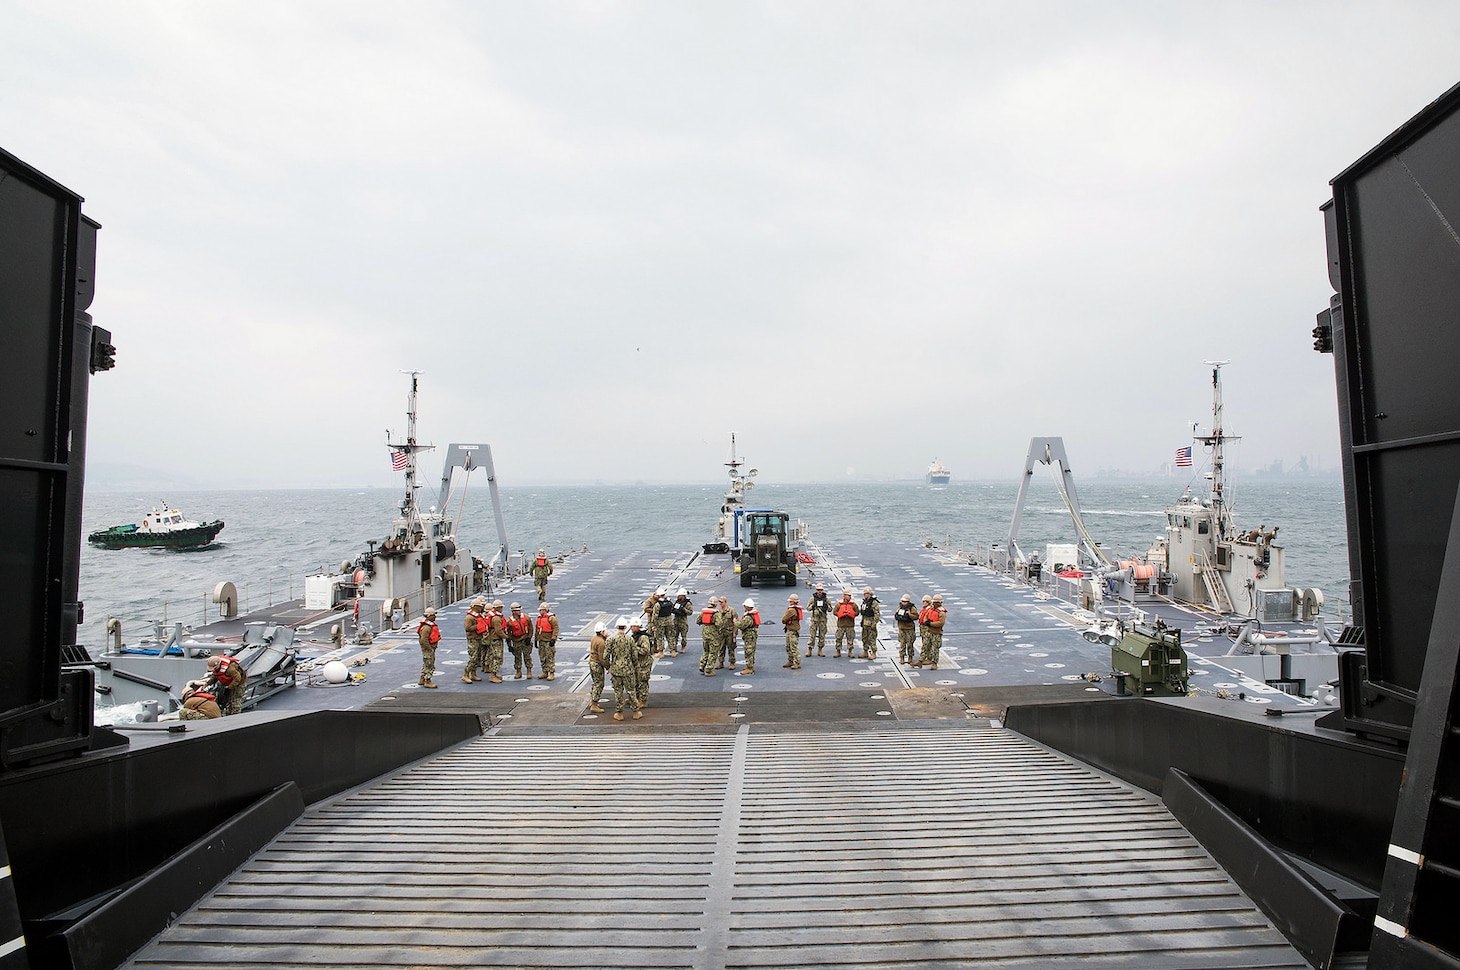 Sailors, attached to Amphibious Construction Battalion 1 and 2, and Assault Craft Unit 1, successfully secure the Improved Navy Lighterage System Roll-on/Roll-off Discharge Facility to the ramp of USNS Pililaau (T-AKR 304) during Operation Pacific Reach Exercise 2017 (OPRex17), April 9, 2017. OPRex17 is a bilateral training event designed to ensure readiness and sustain the Republic of Korea-U.S. Alliance by exercising an Area Distribution Center (ADC), an Air Terminal Supply Point (ATSP), Combined Joint Logistics Over-the-Shore (CLOTS), and the use of rail, inland waterways, and coastal lift operations to validate the operational reach concept.